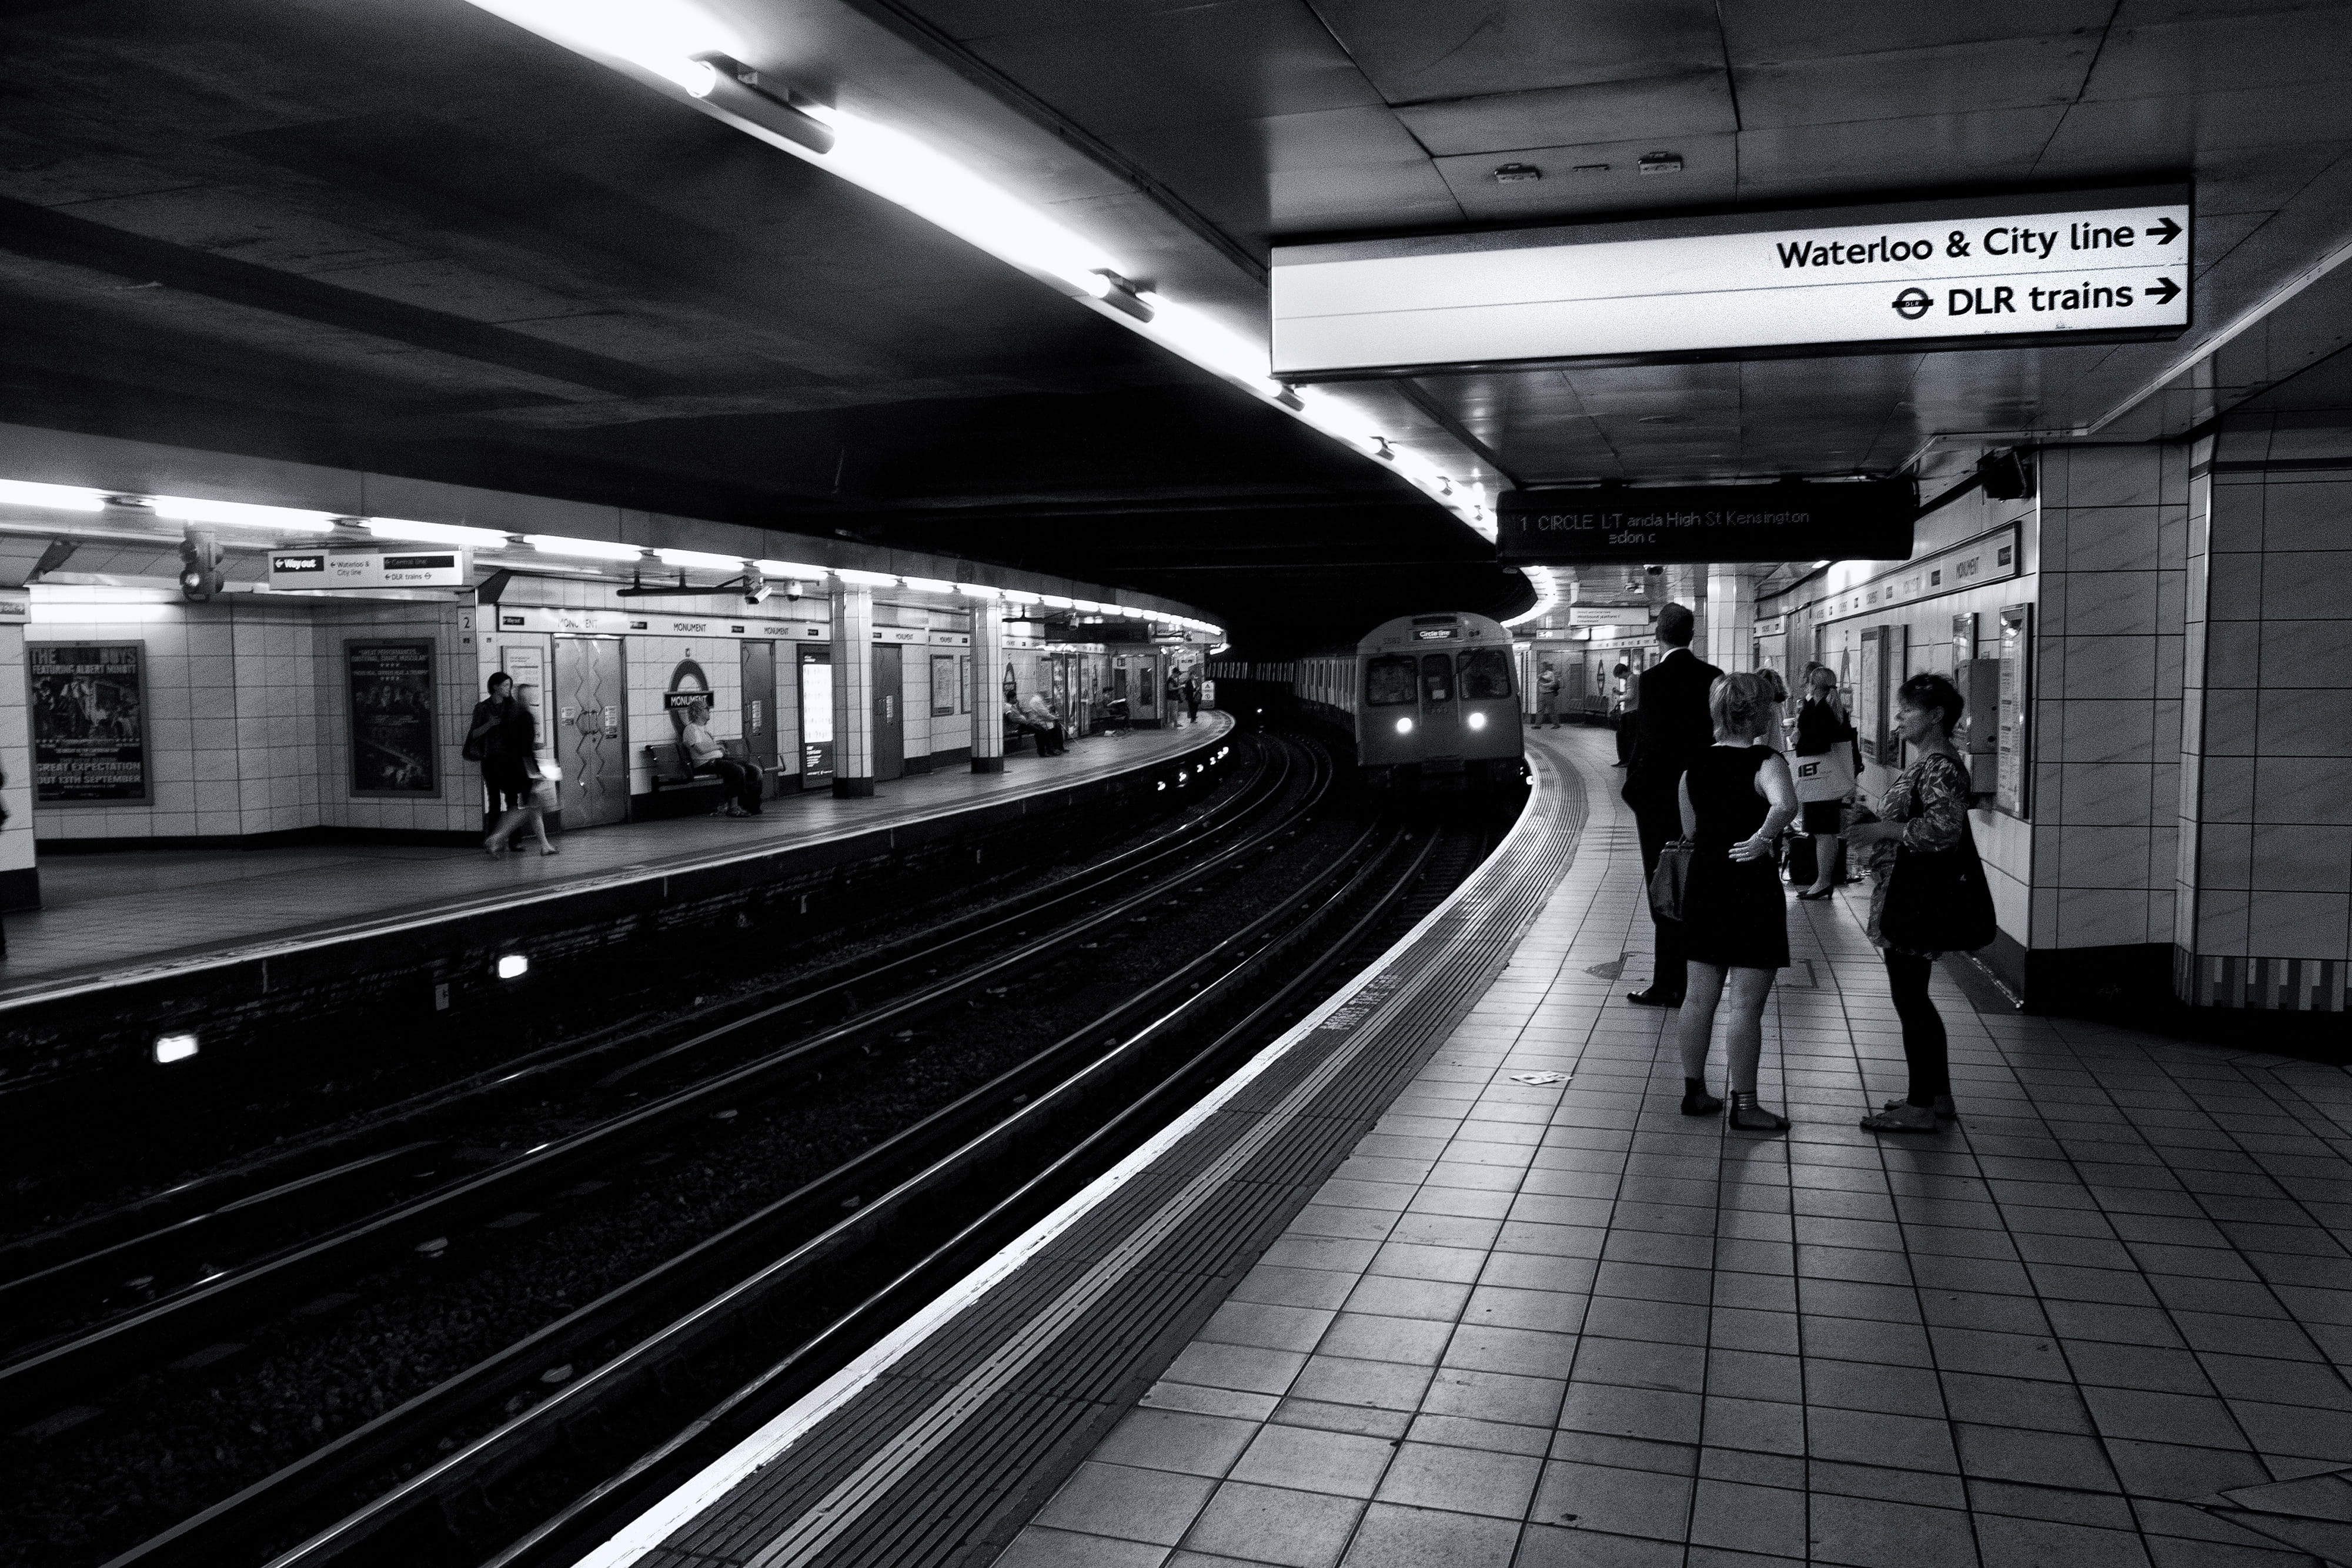 Monochrome shot of subway passengers as they wait for their train on the London Underground